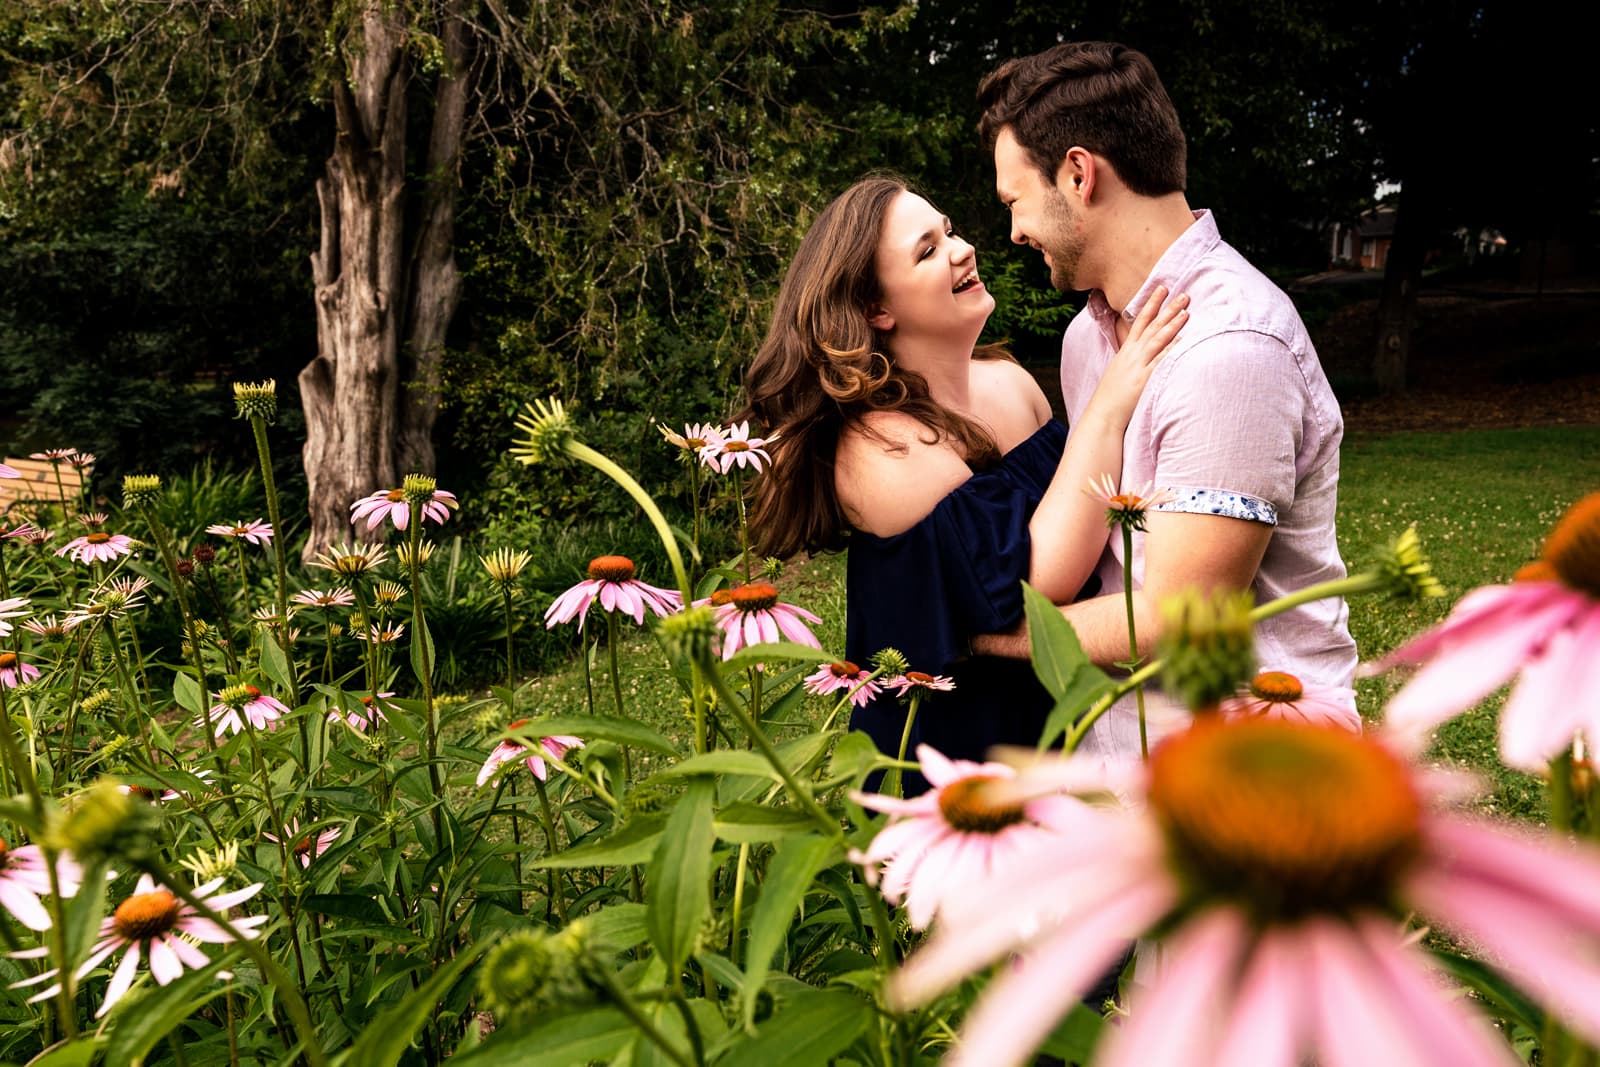 Raleigh Rose Garden is a great engagement photo location